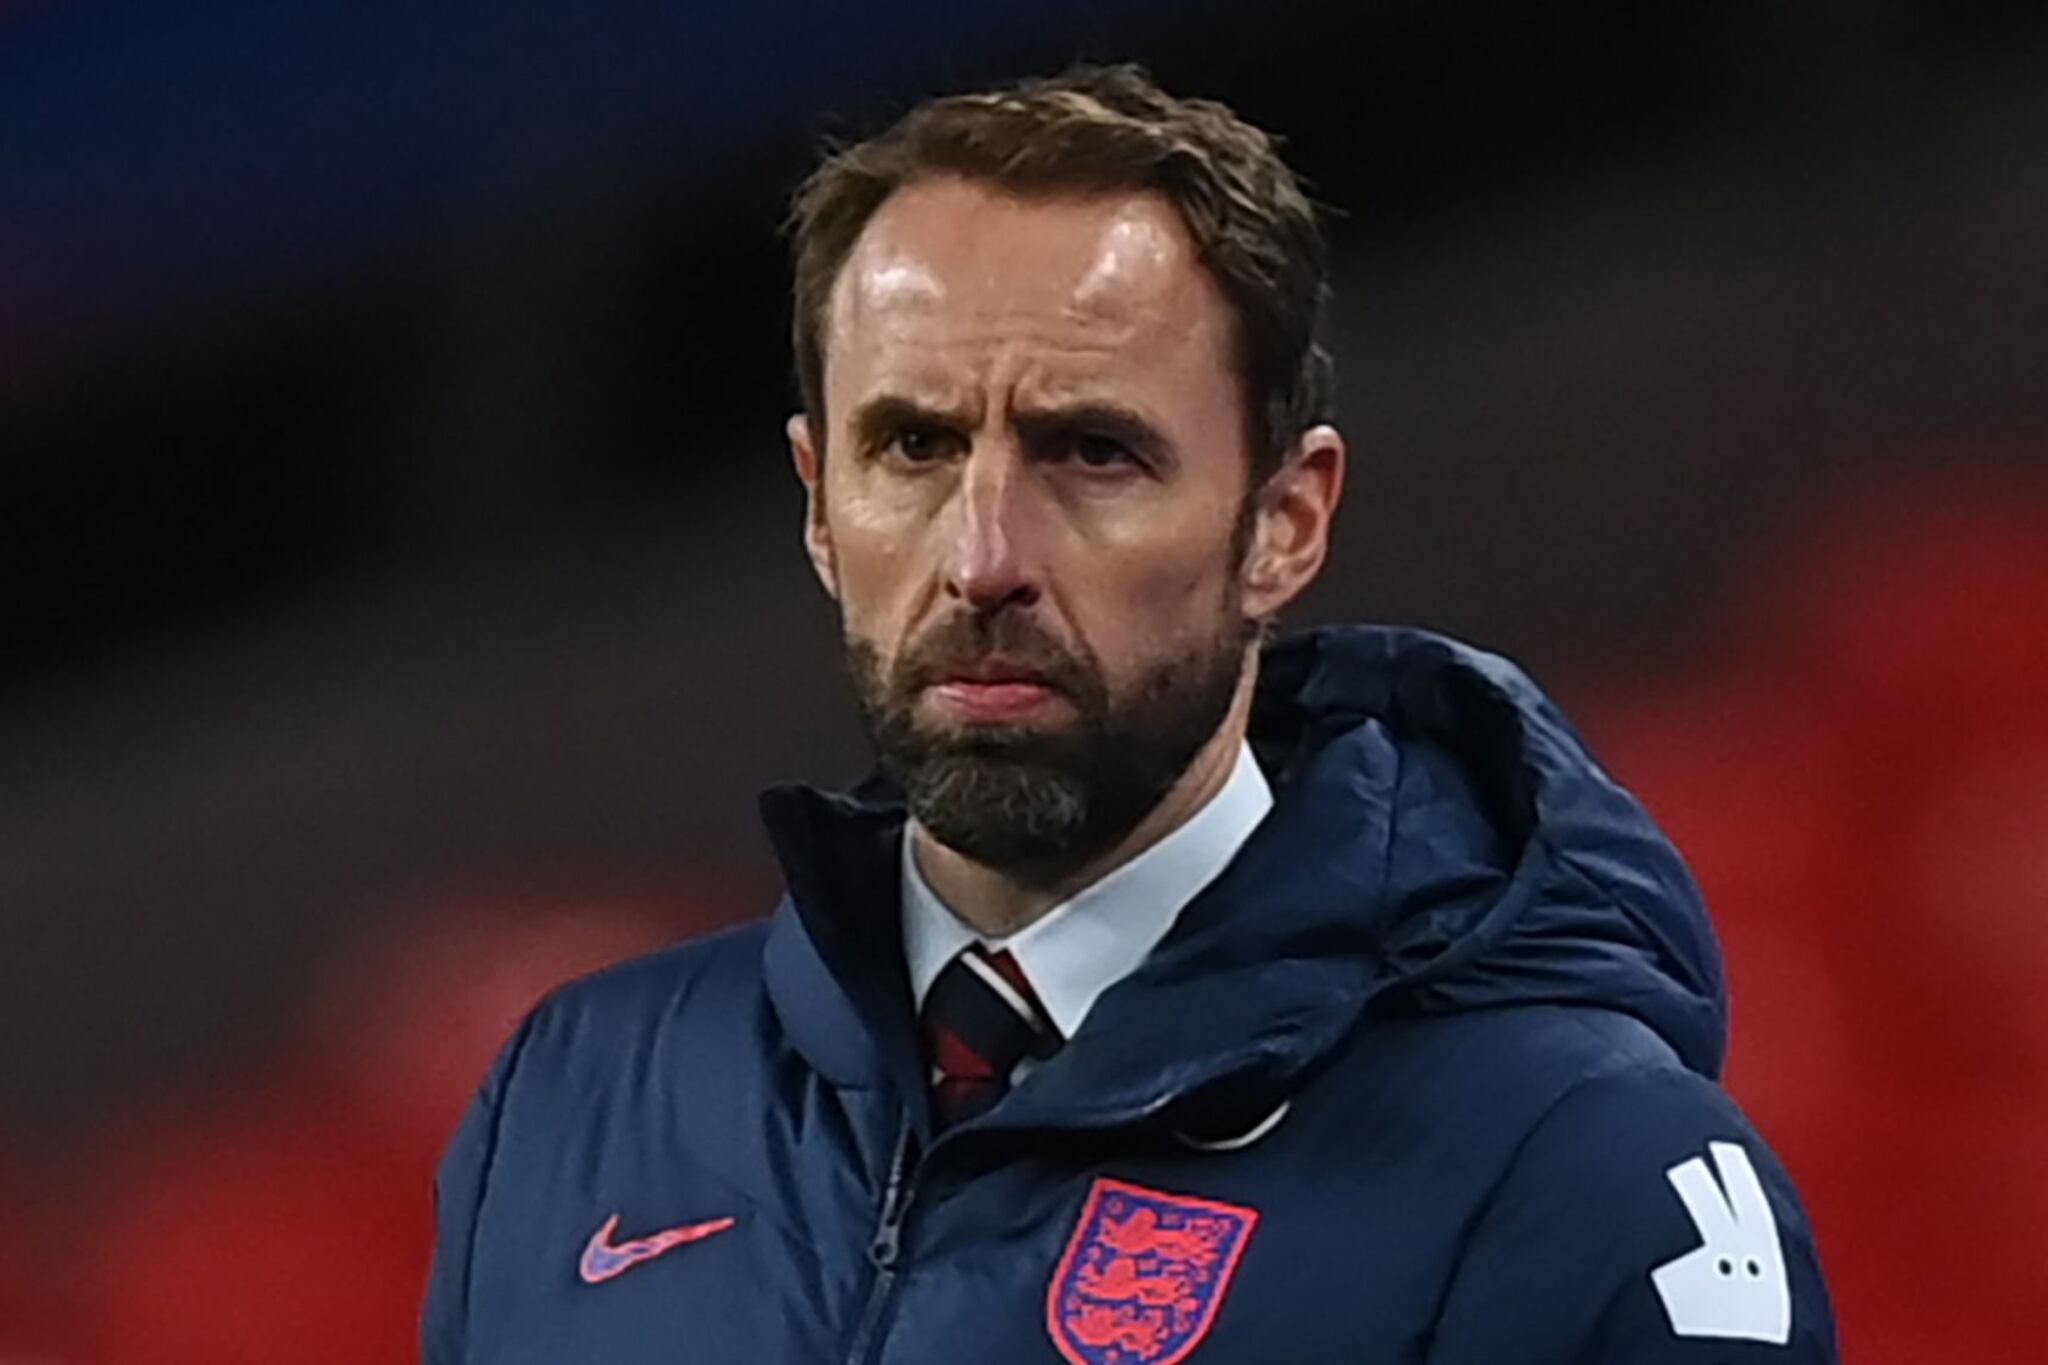 The £20m fortune of England coach Gareth Southgate: the richest manager in Europe qualifiers